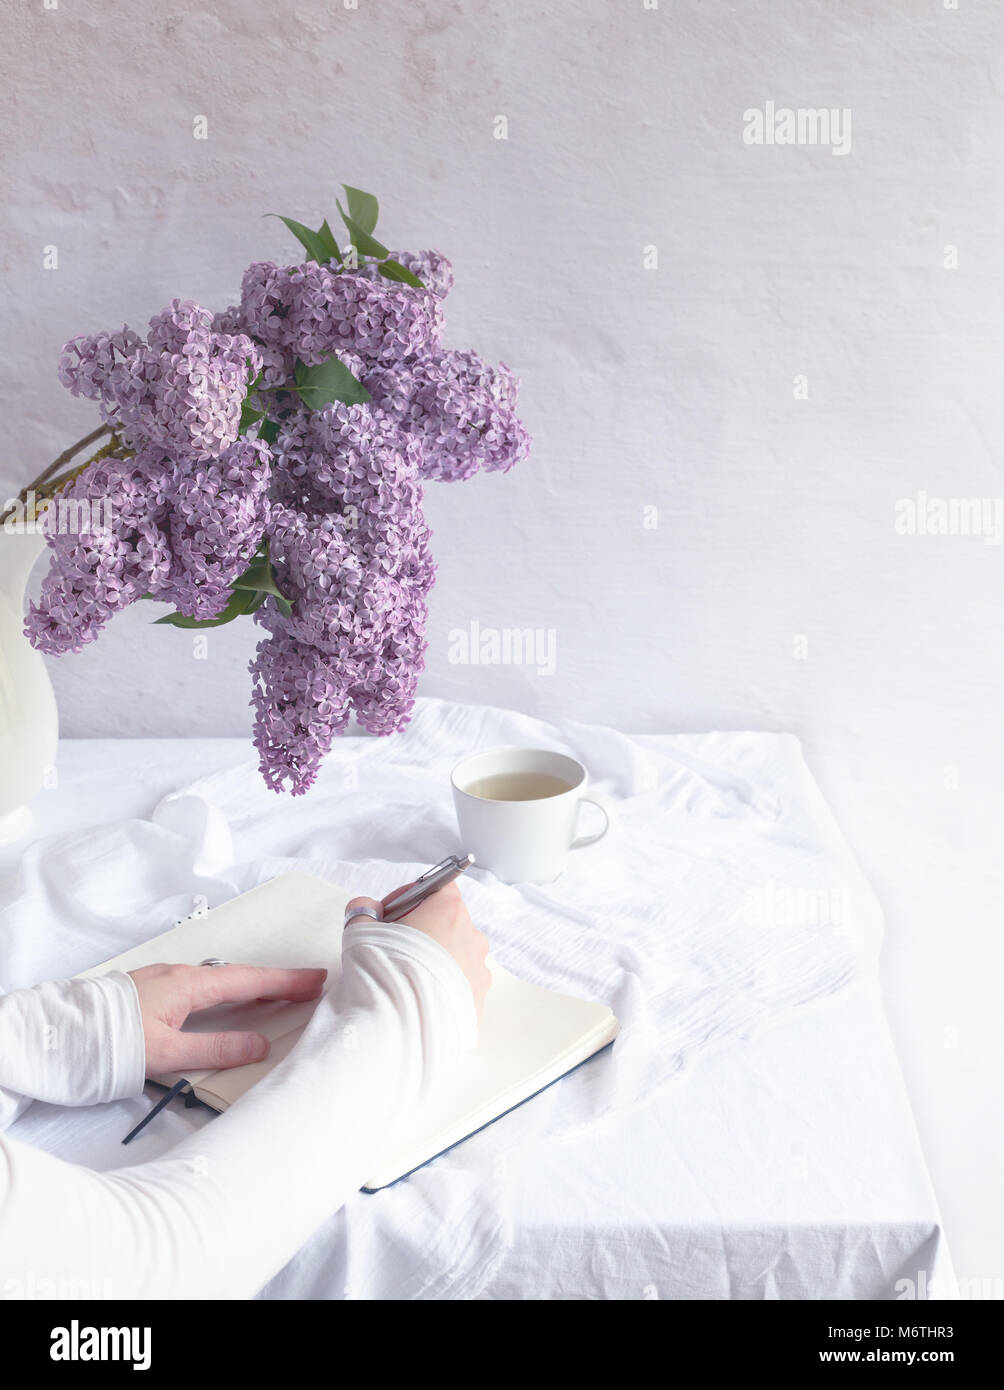 indoor scene with table covered with white linen, bunch of fresh lilac flowers, teacup, hands on notebook, one  hand writing Stock Photo